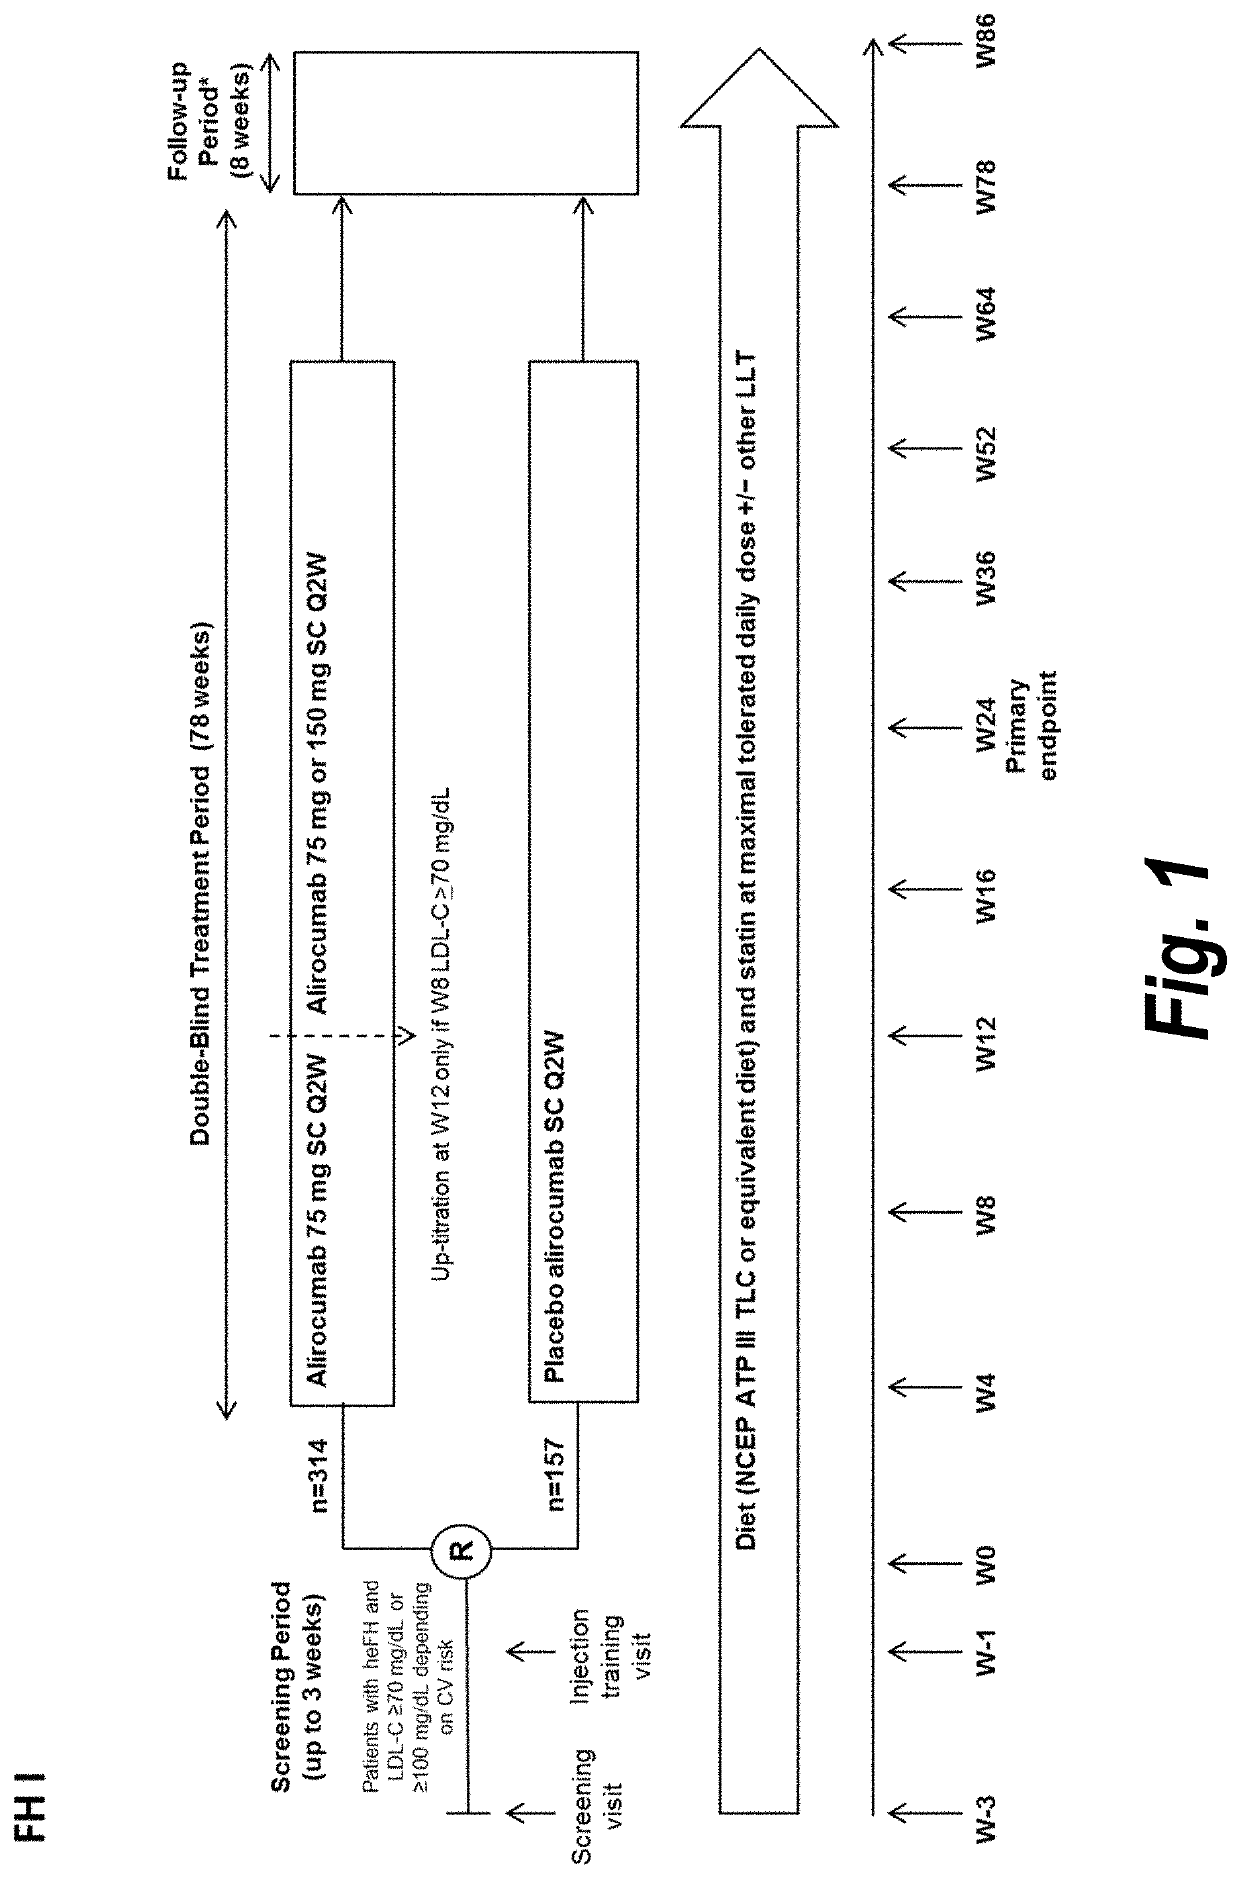 Methods for treating patients with heterozygous familial hypercholesterolemia (heFH) with an anti-PCSK9 antibody